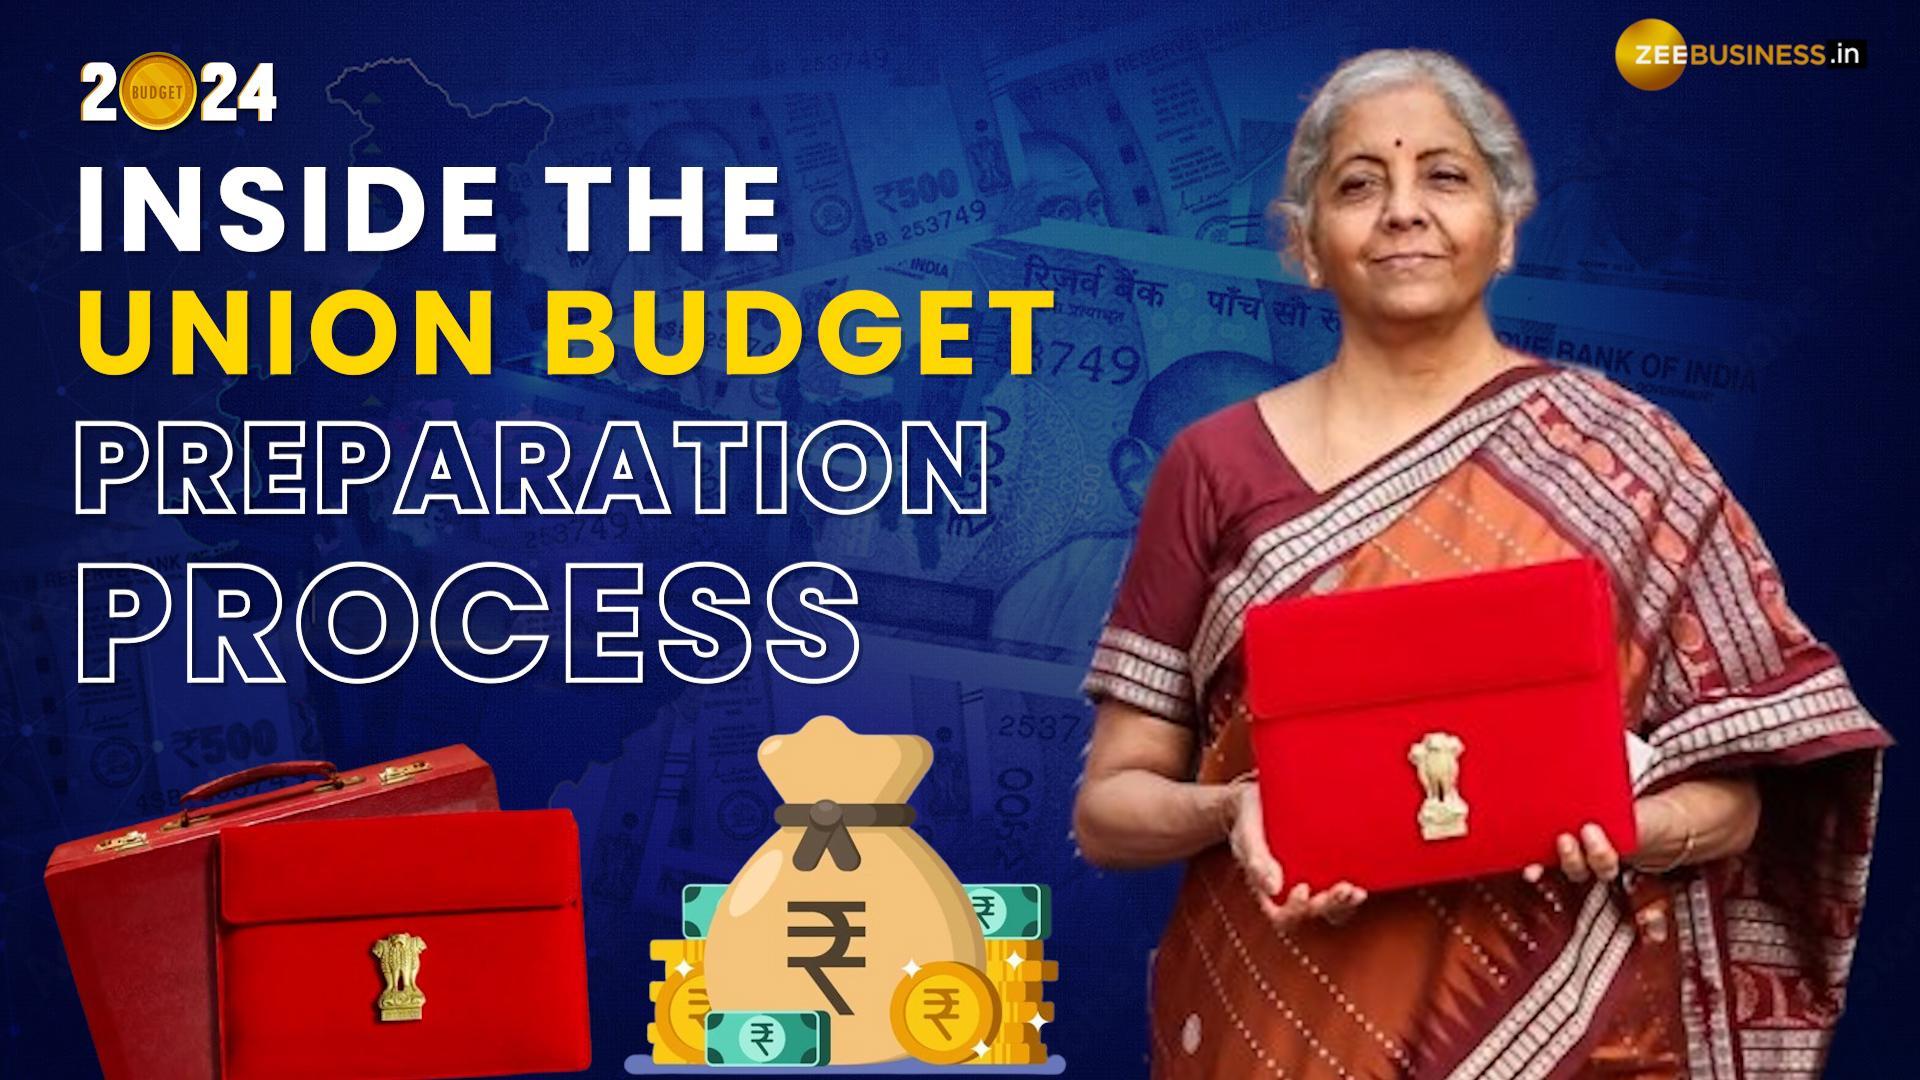 Union Budget 2024: A Peek Behind The Preparation Of Union Budget 